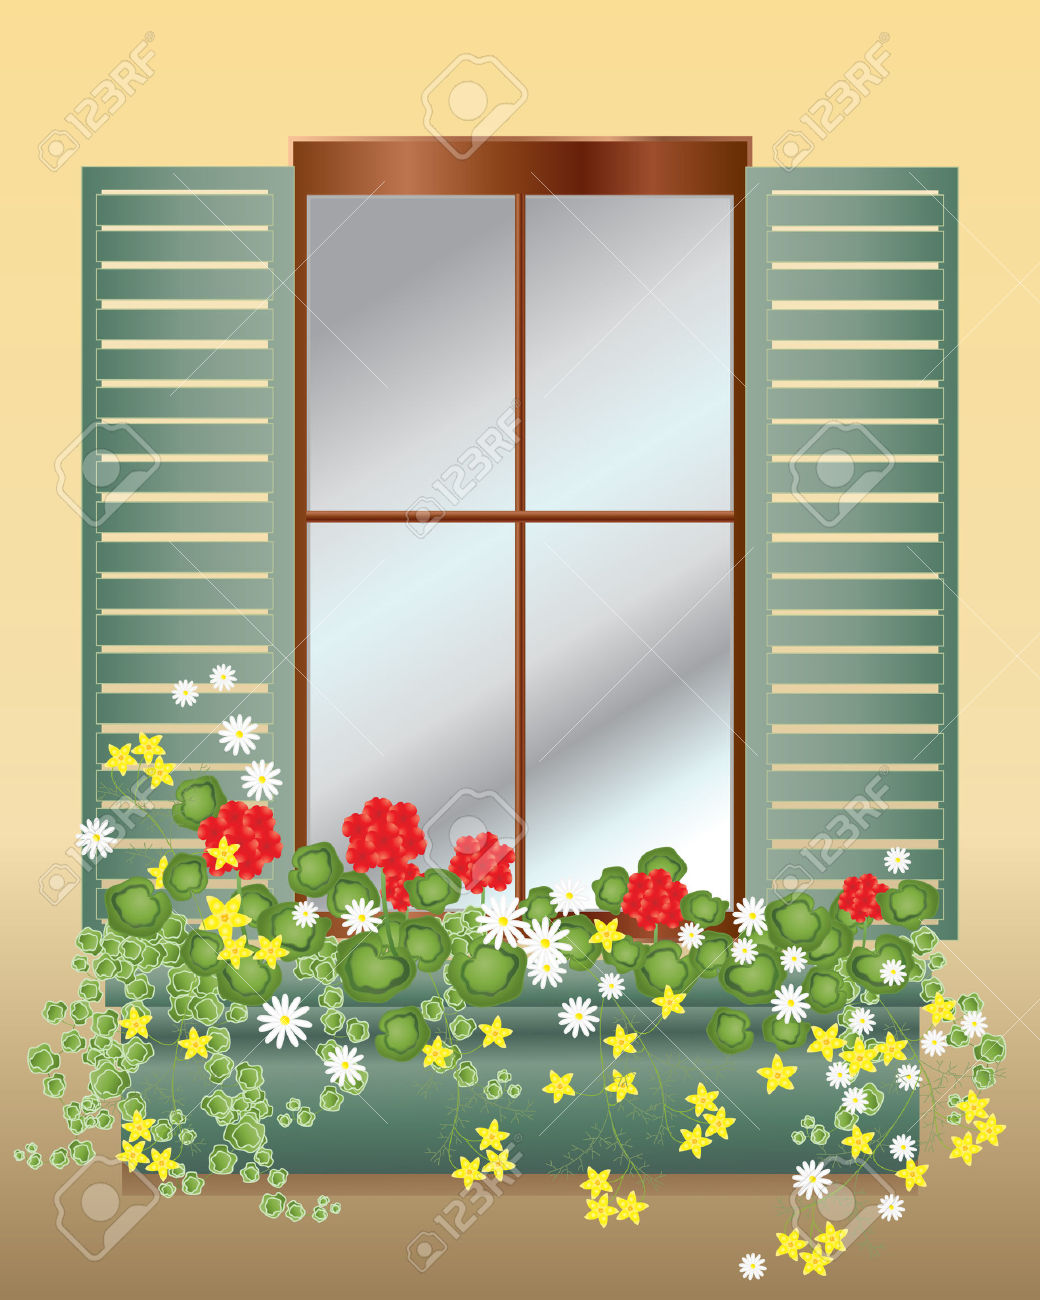 clipart of a window - photo #27